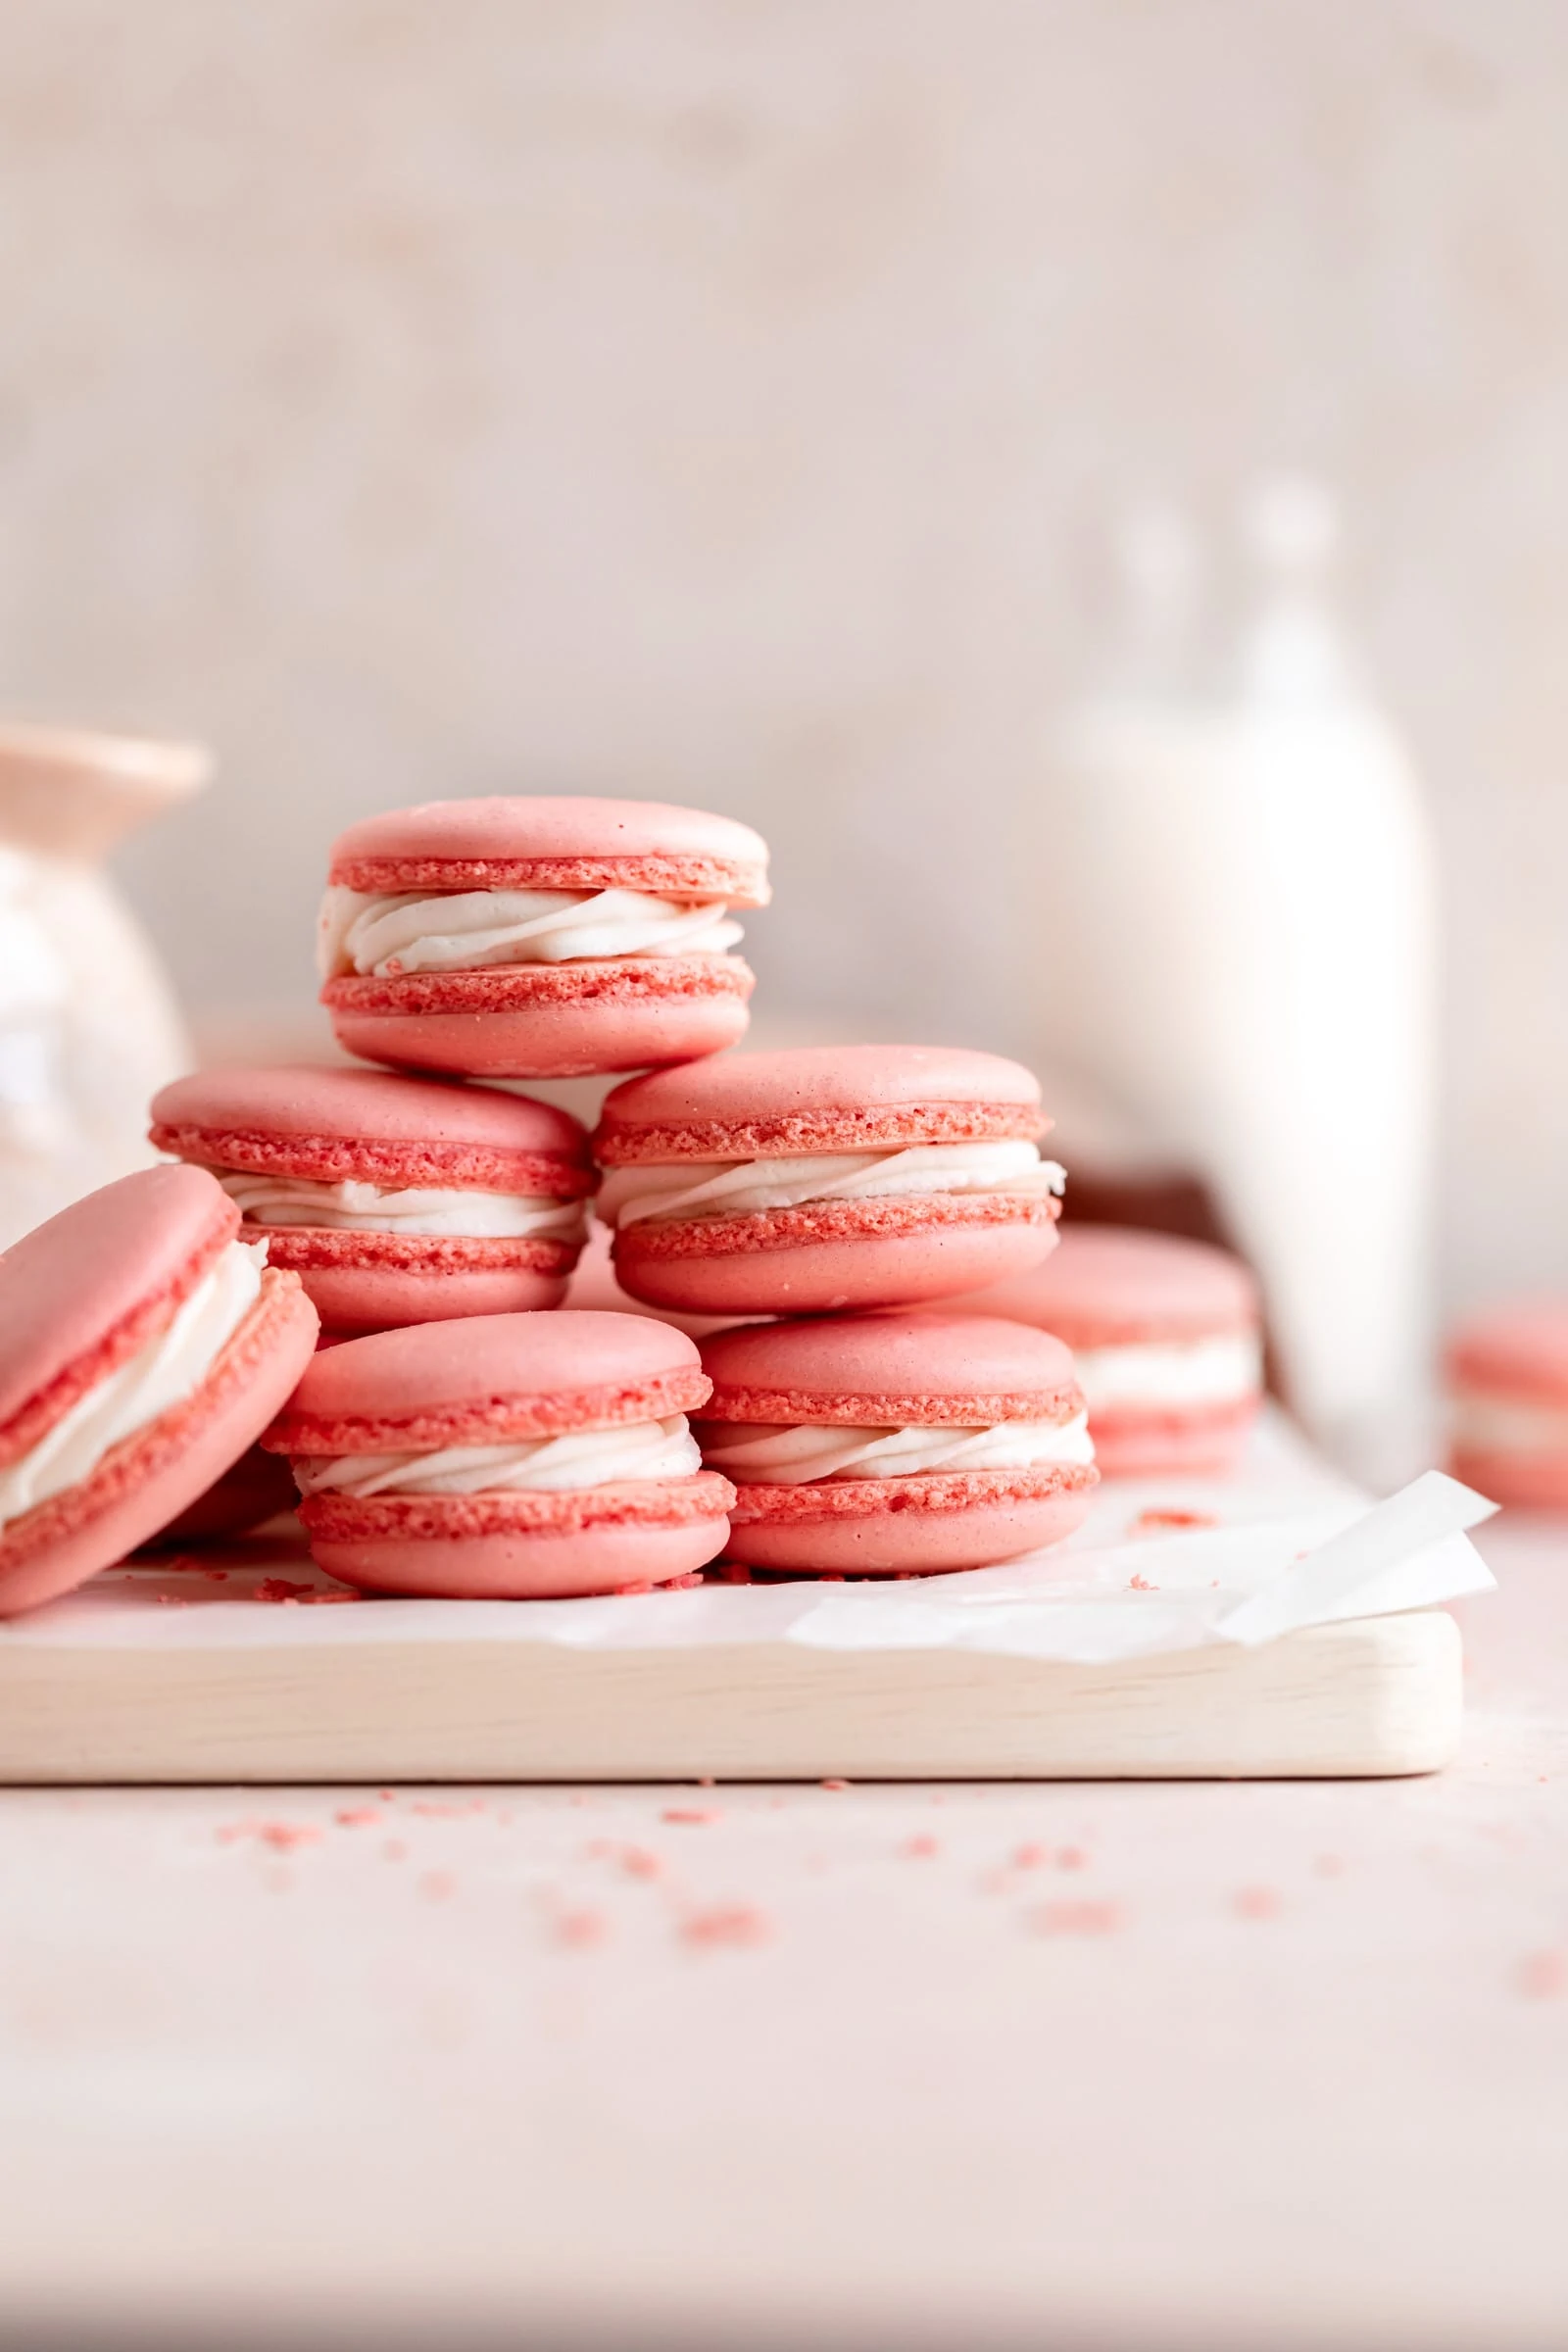 A stack of pink macarons on top - Bakery, macarons